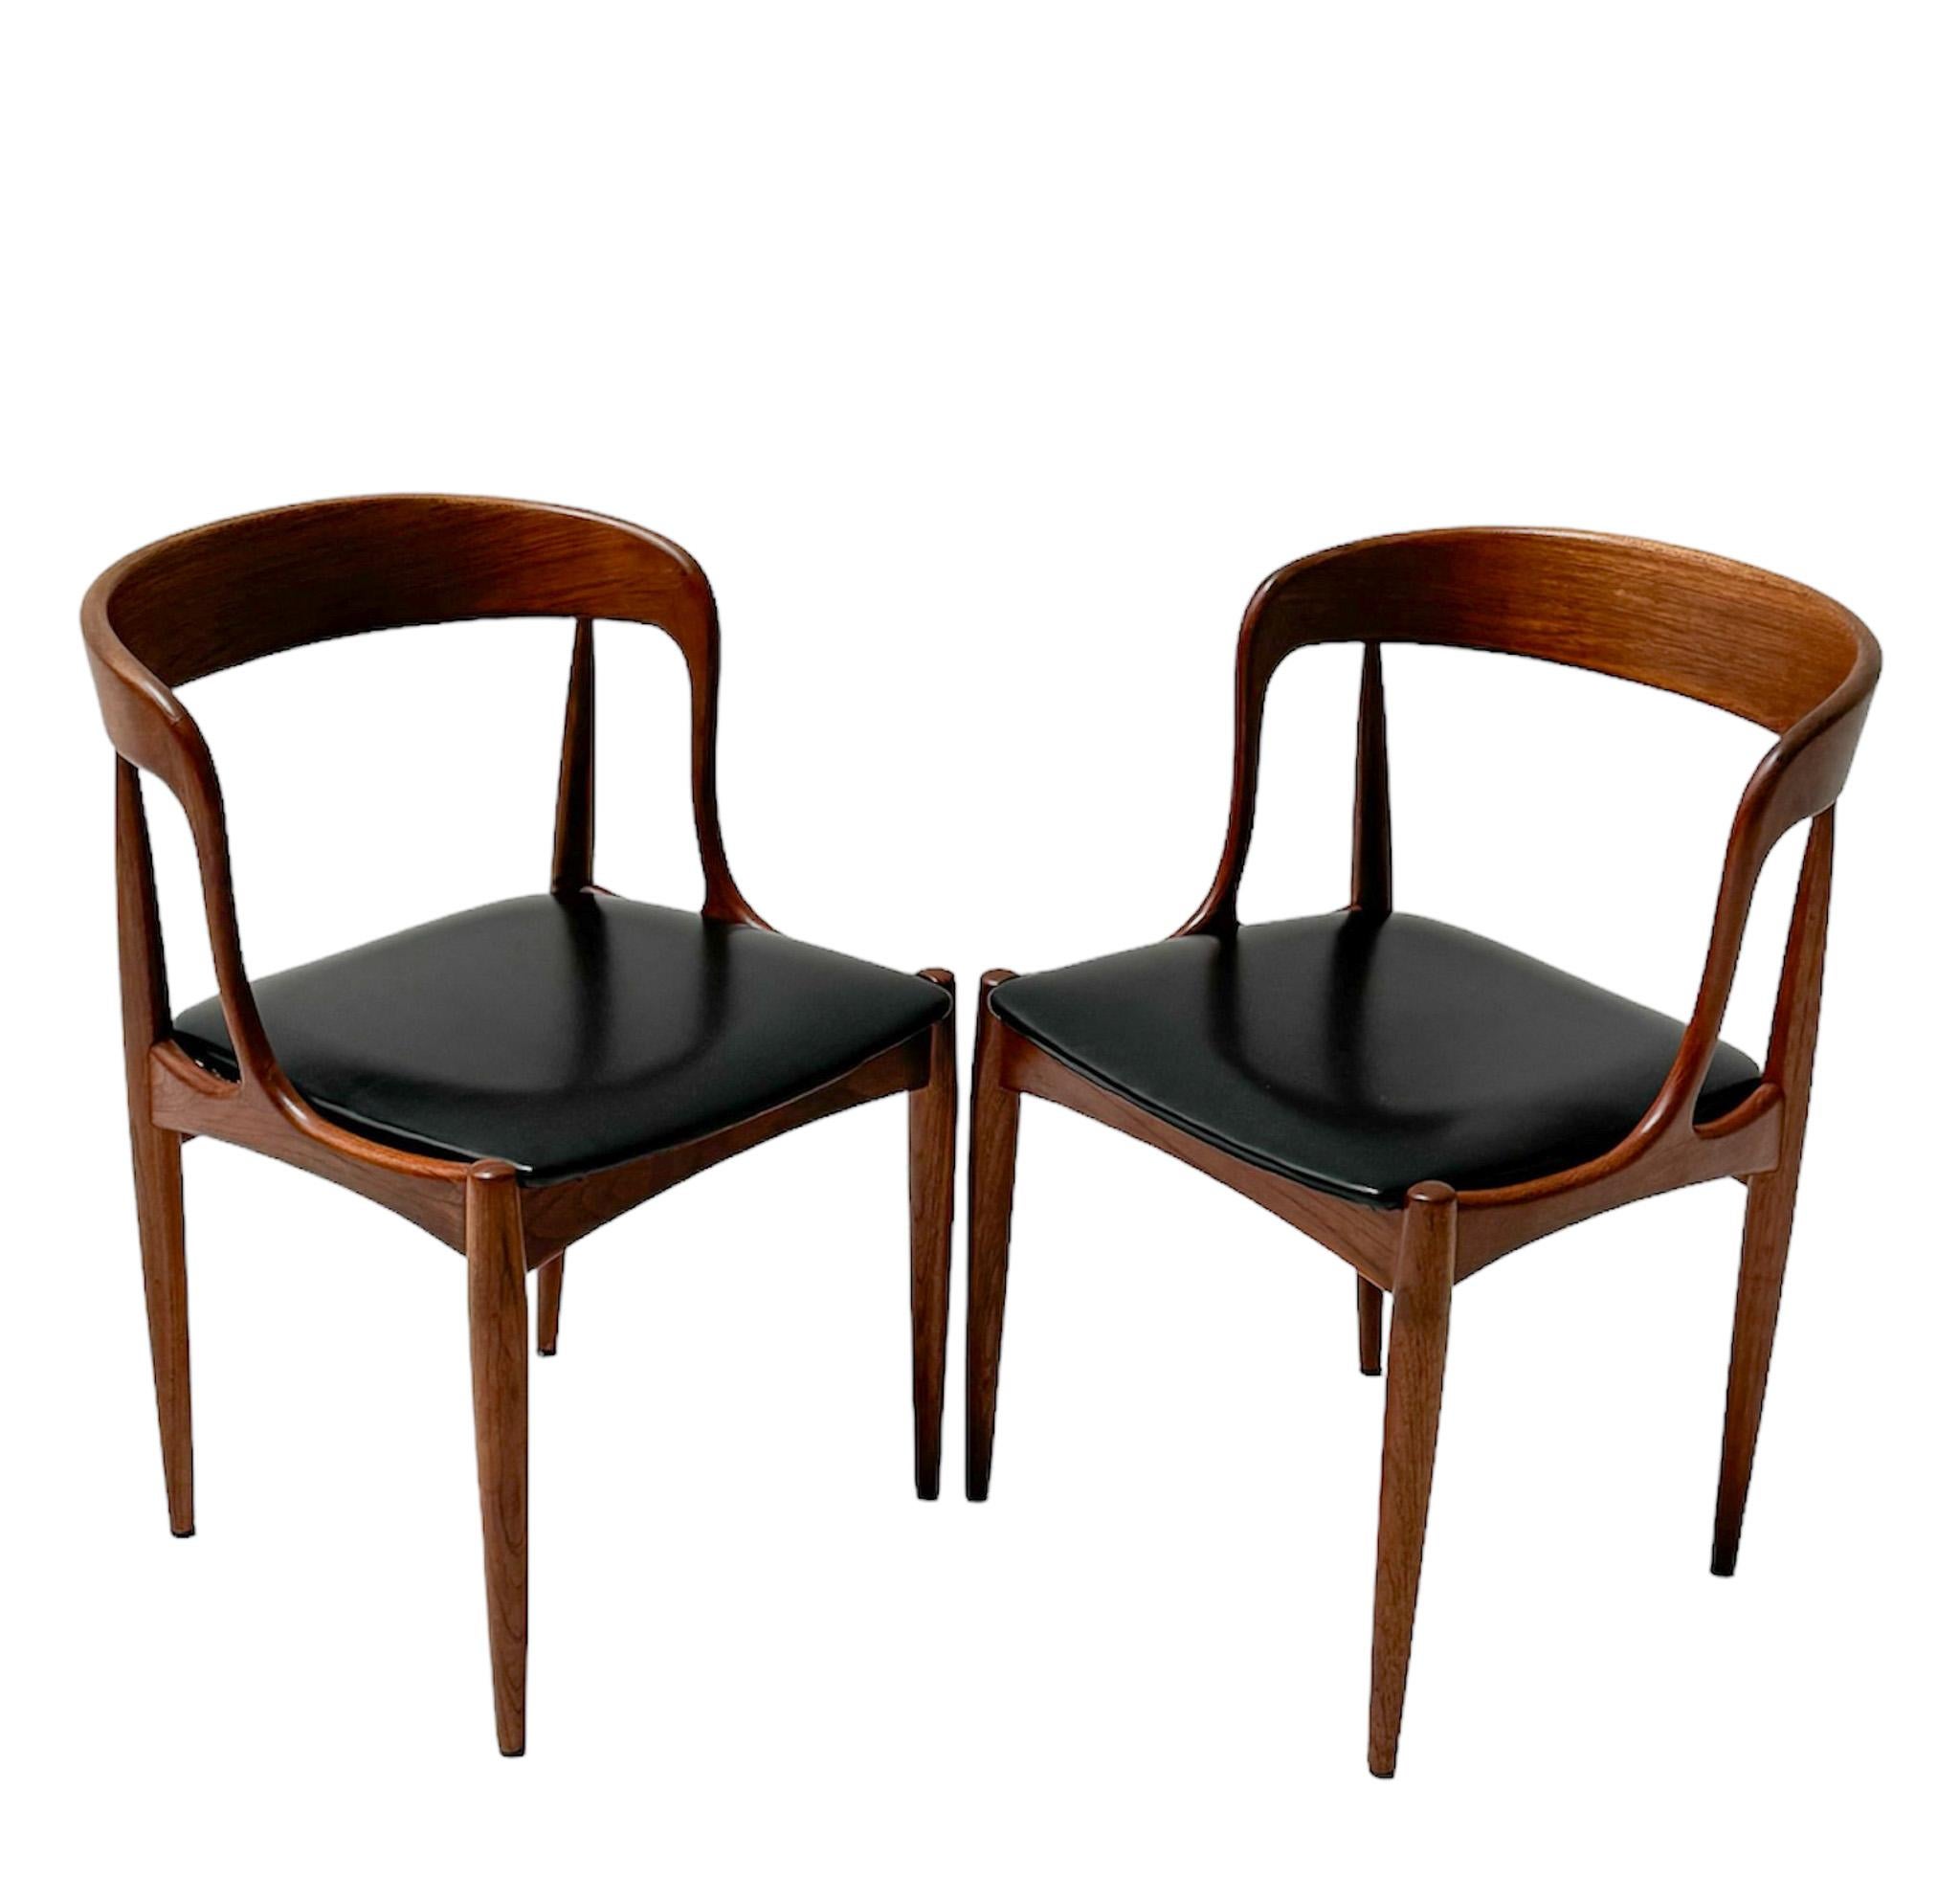 Four Teak Mid-Century Modern Dining Chairs by Johannes Andersen for Uldum, 1960s For Sale 3